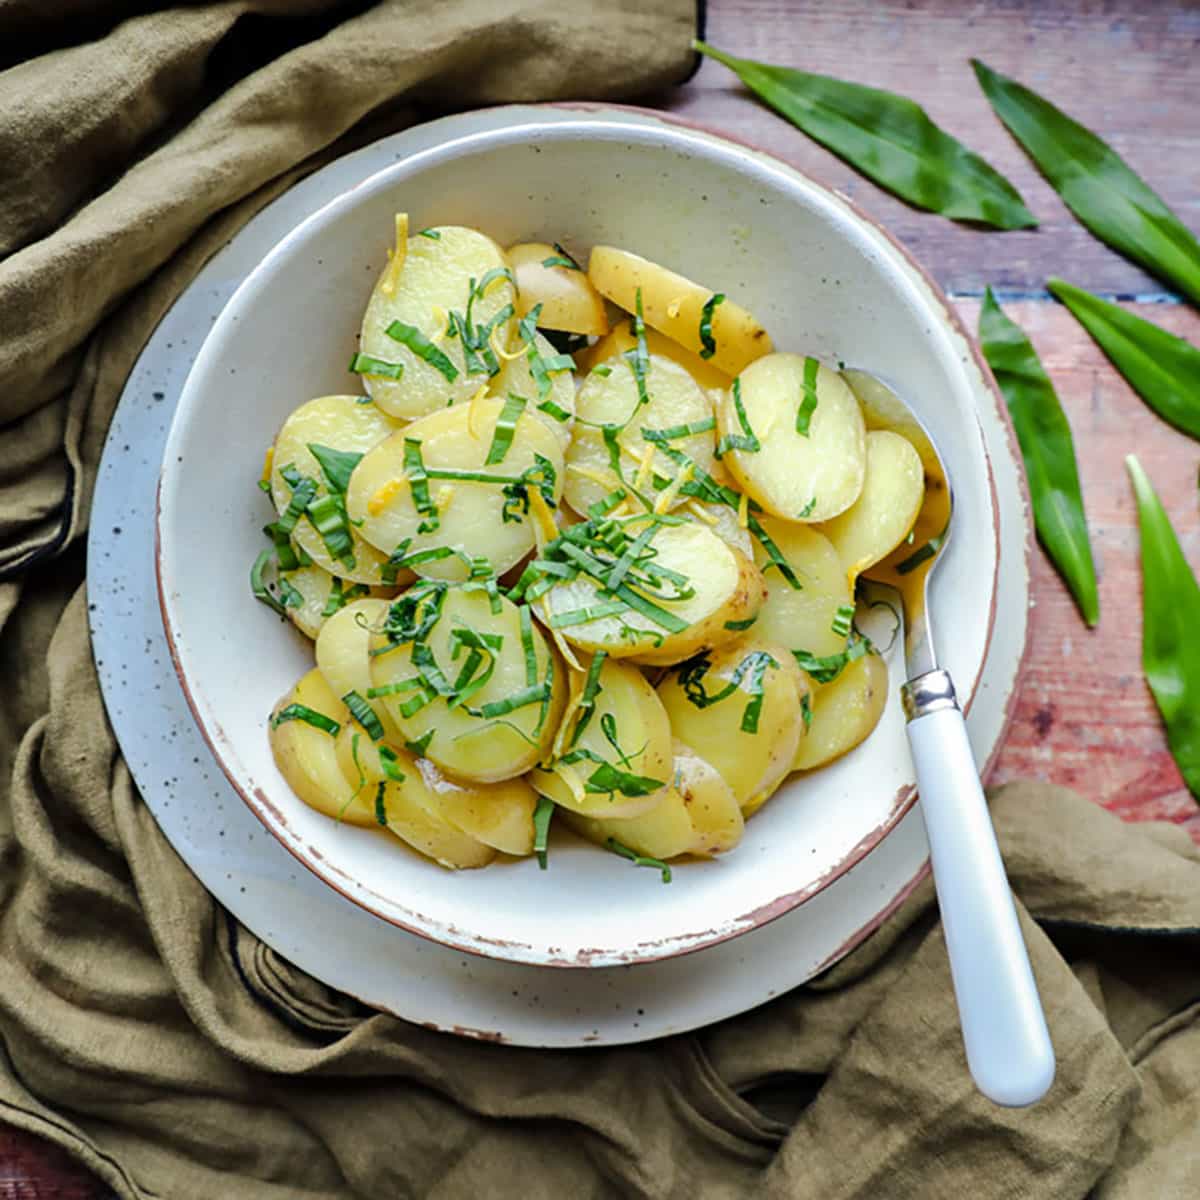 New potatoes with wild garlic & lemon in bowl with spoon